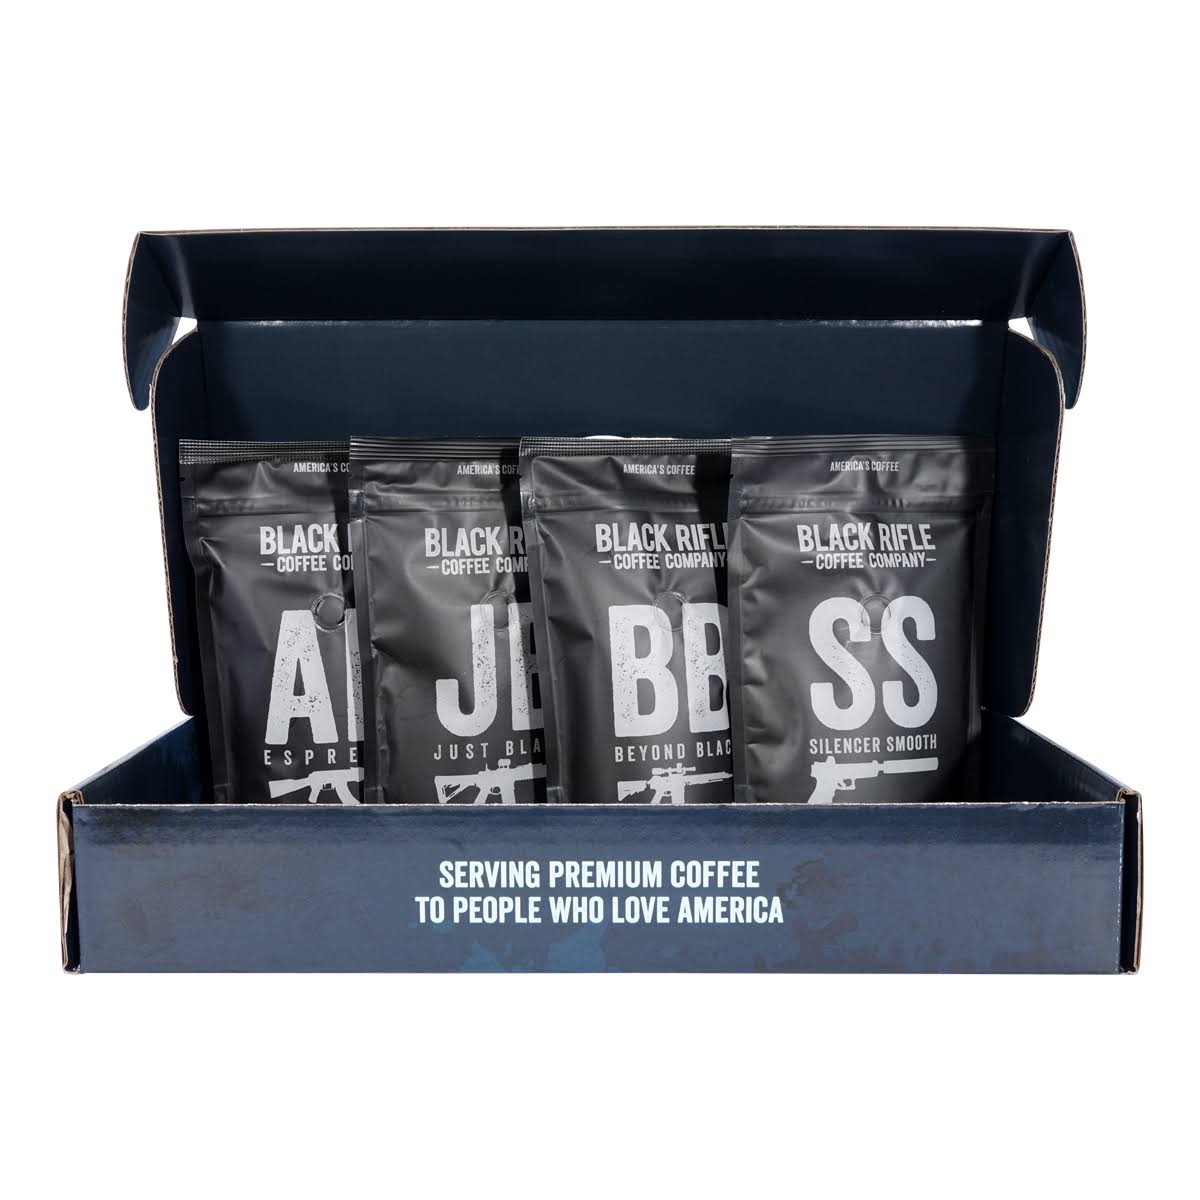 Complete Mission Fuel Kit Variety Sampler | Black Rifle Coffee Company